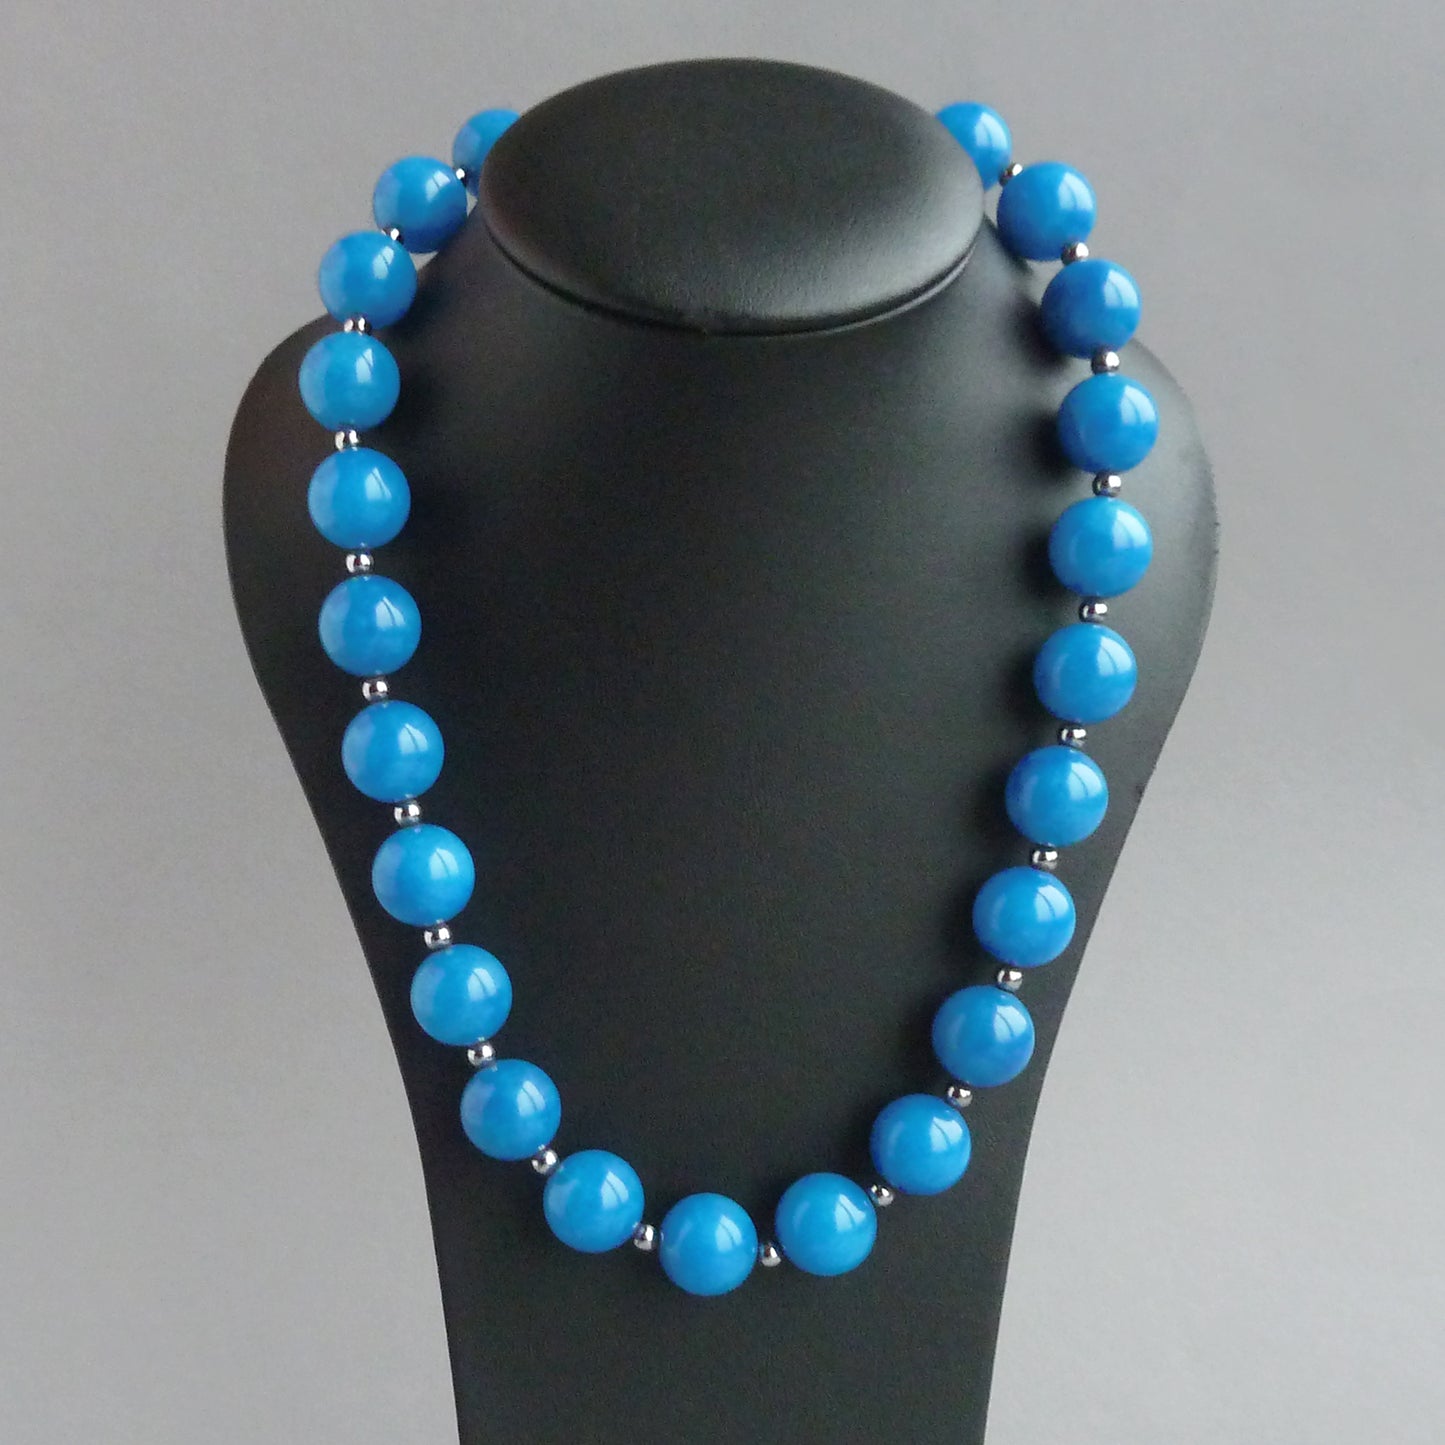 Chunky bright blue beaded necklace